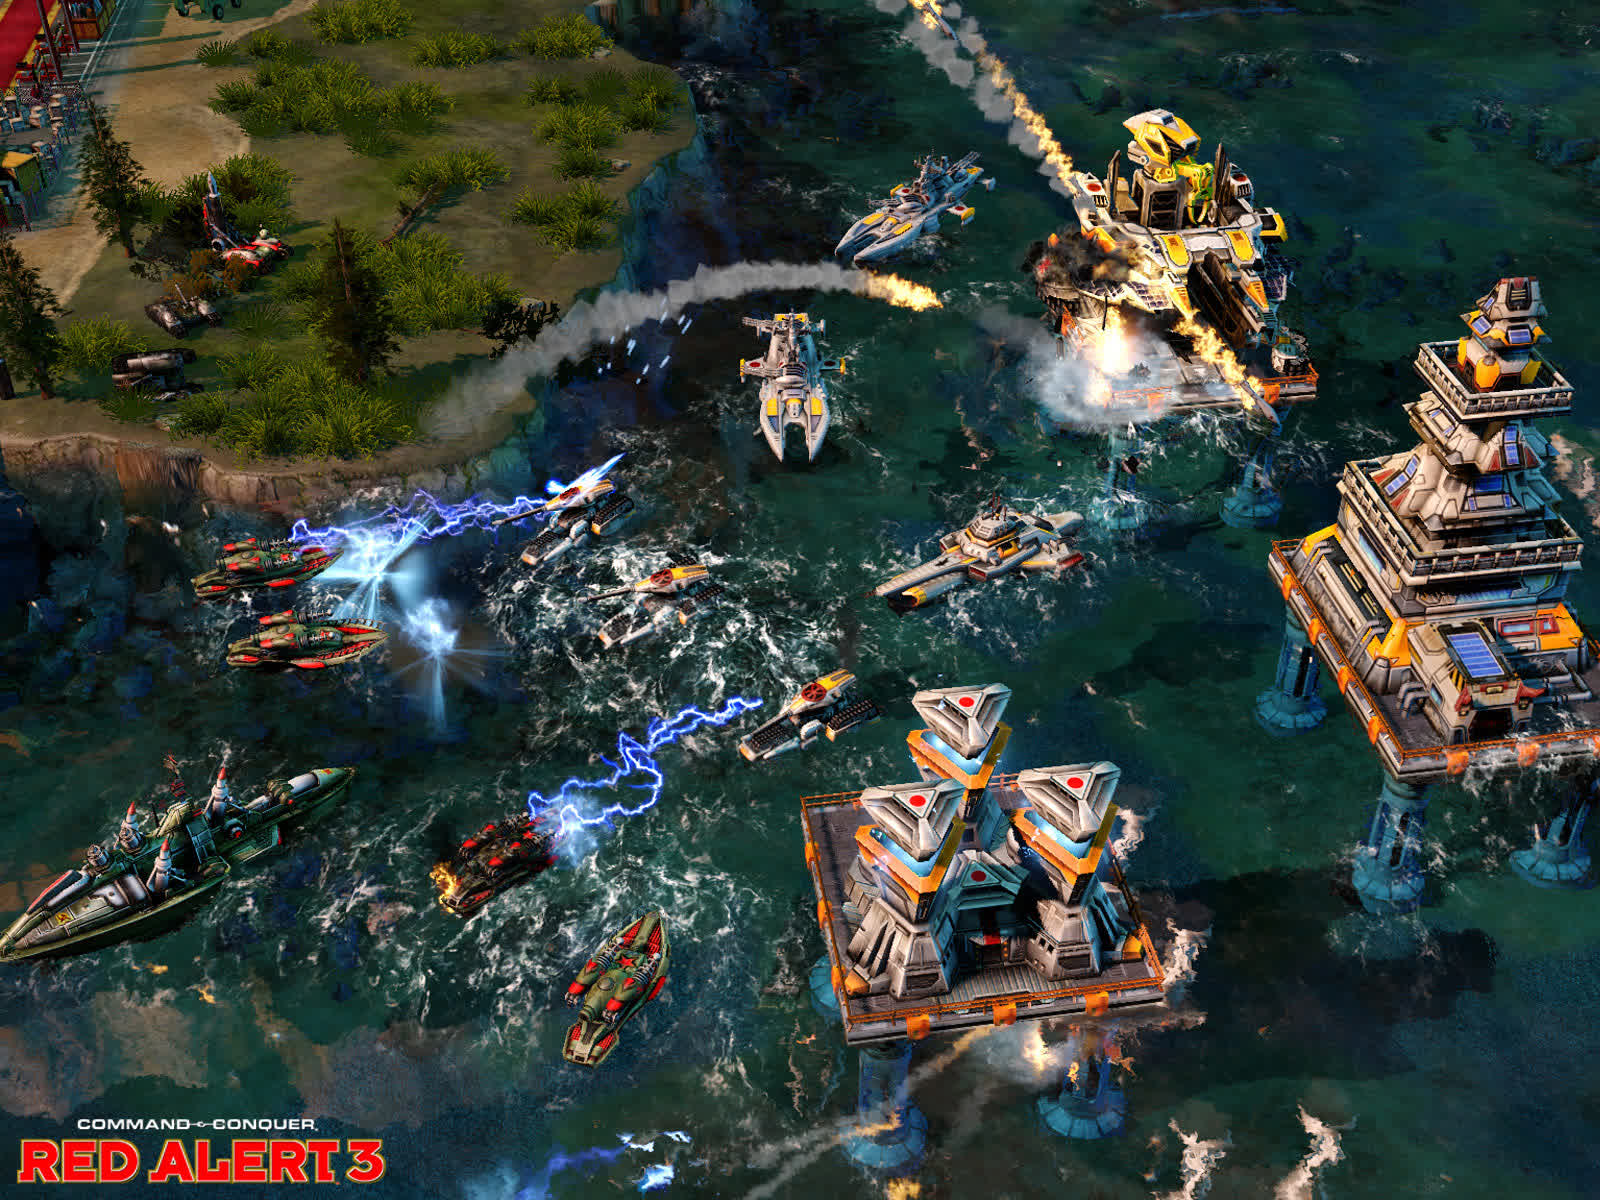 Command & Conquer price cut to $2 has got us thinking EA could announce a new series entry